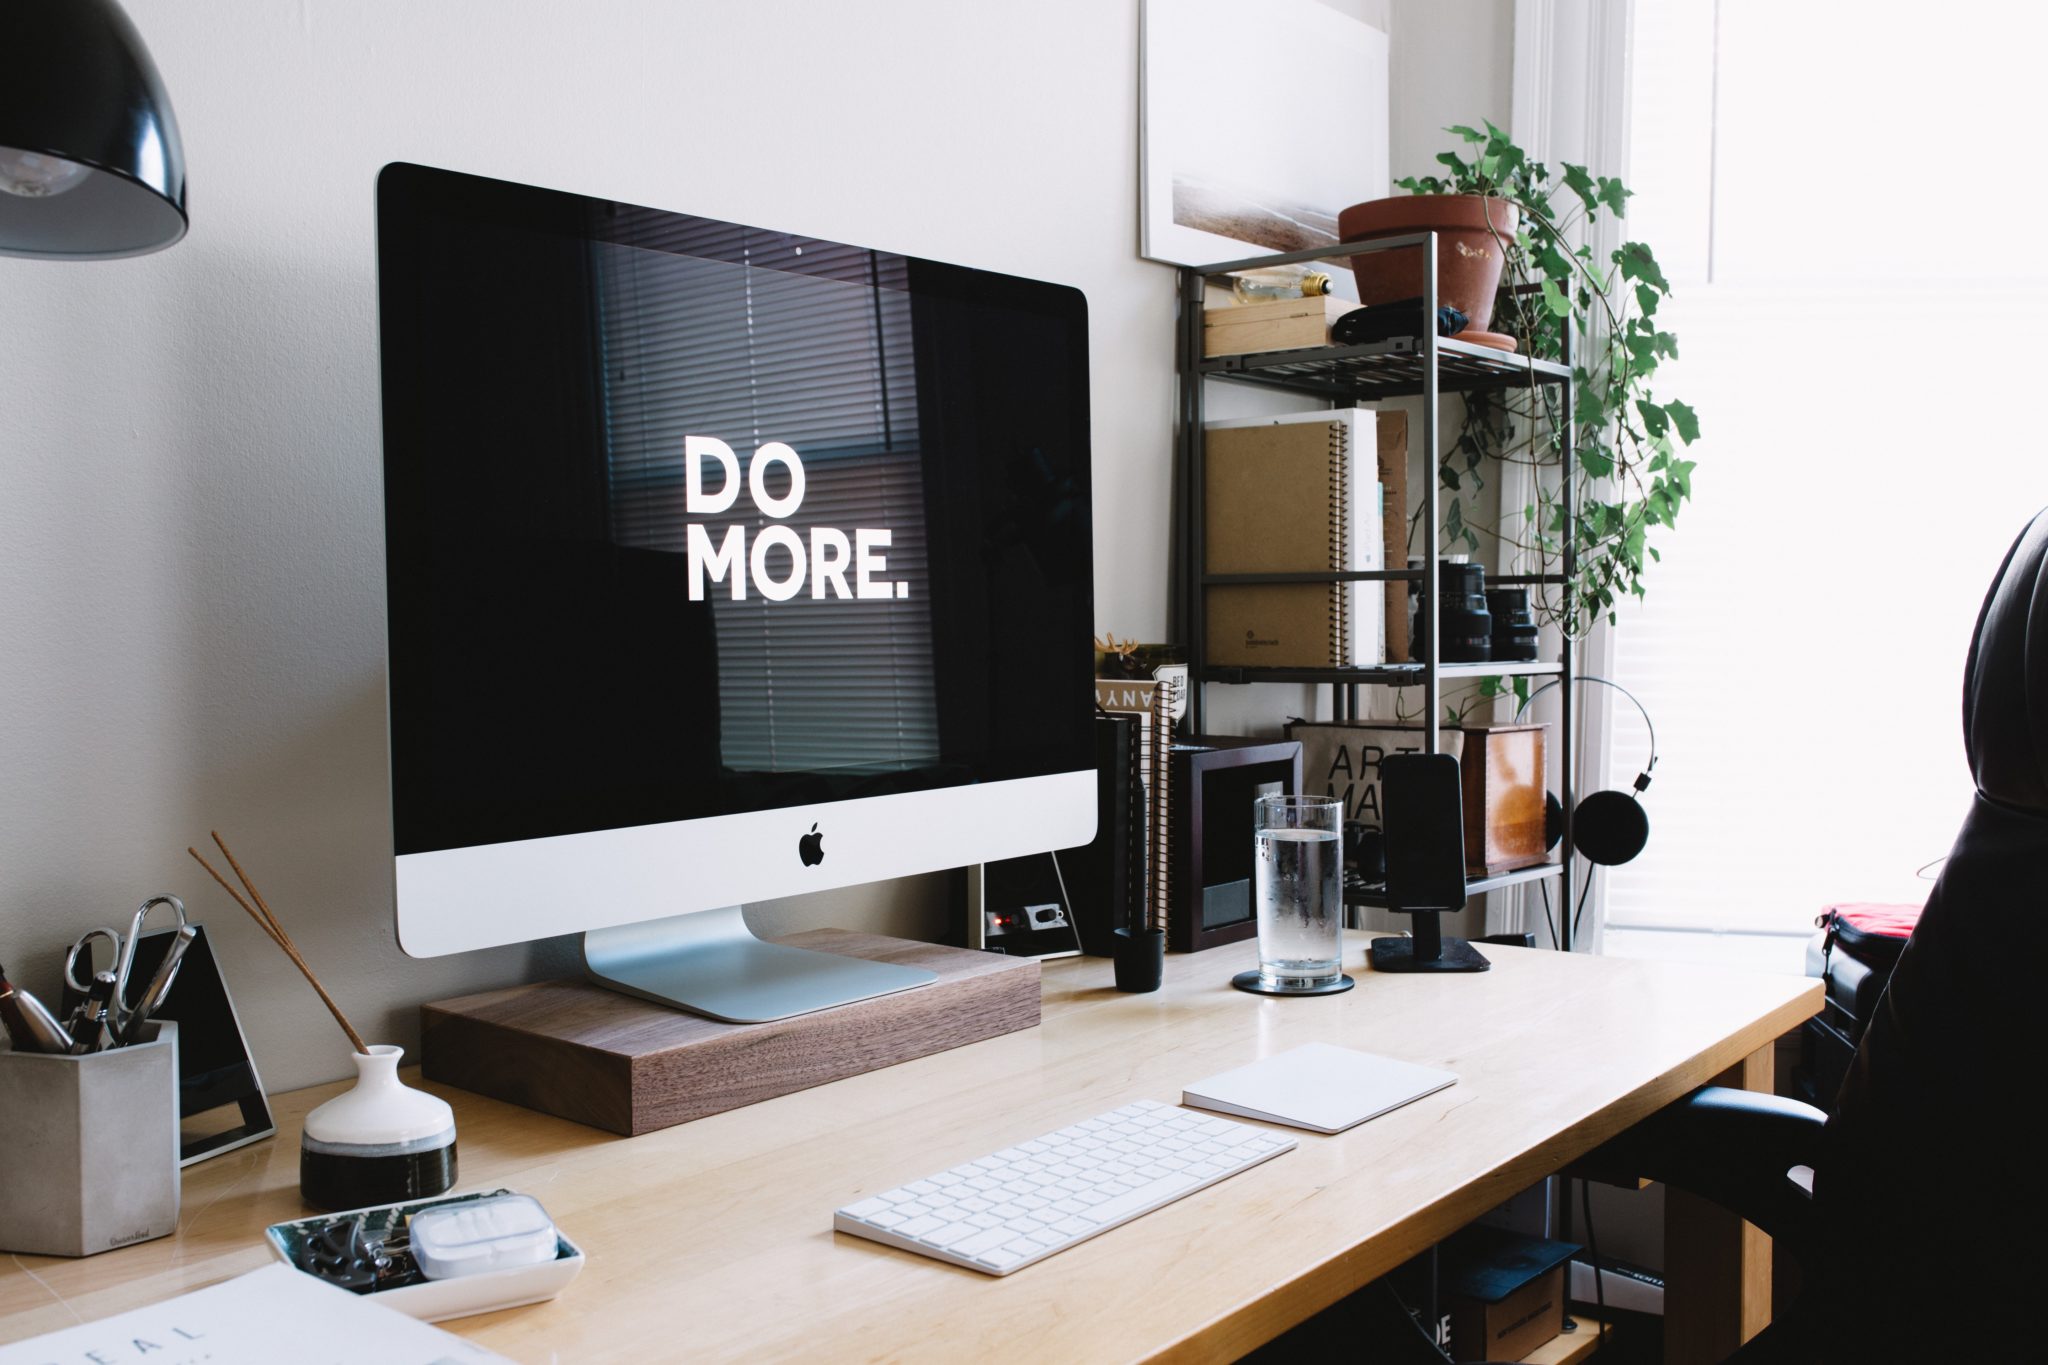 "Do more" shown on an iMac screen in a small home office